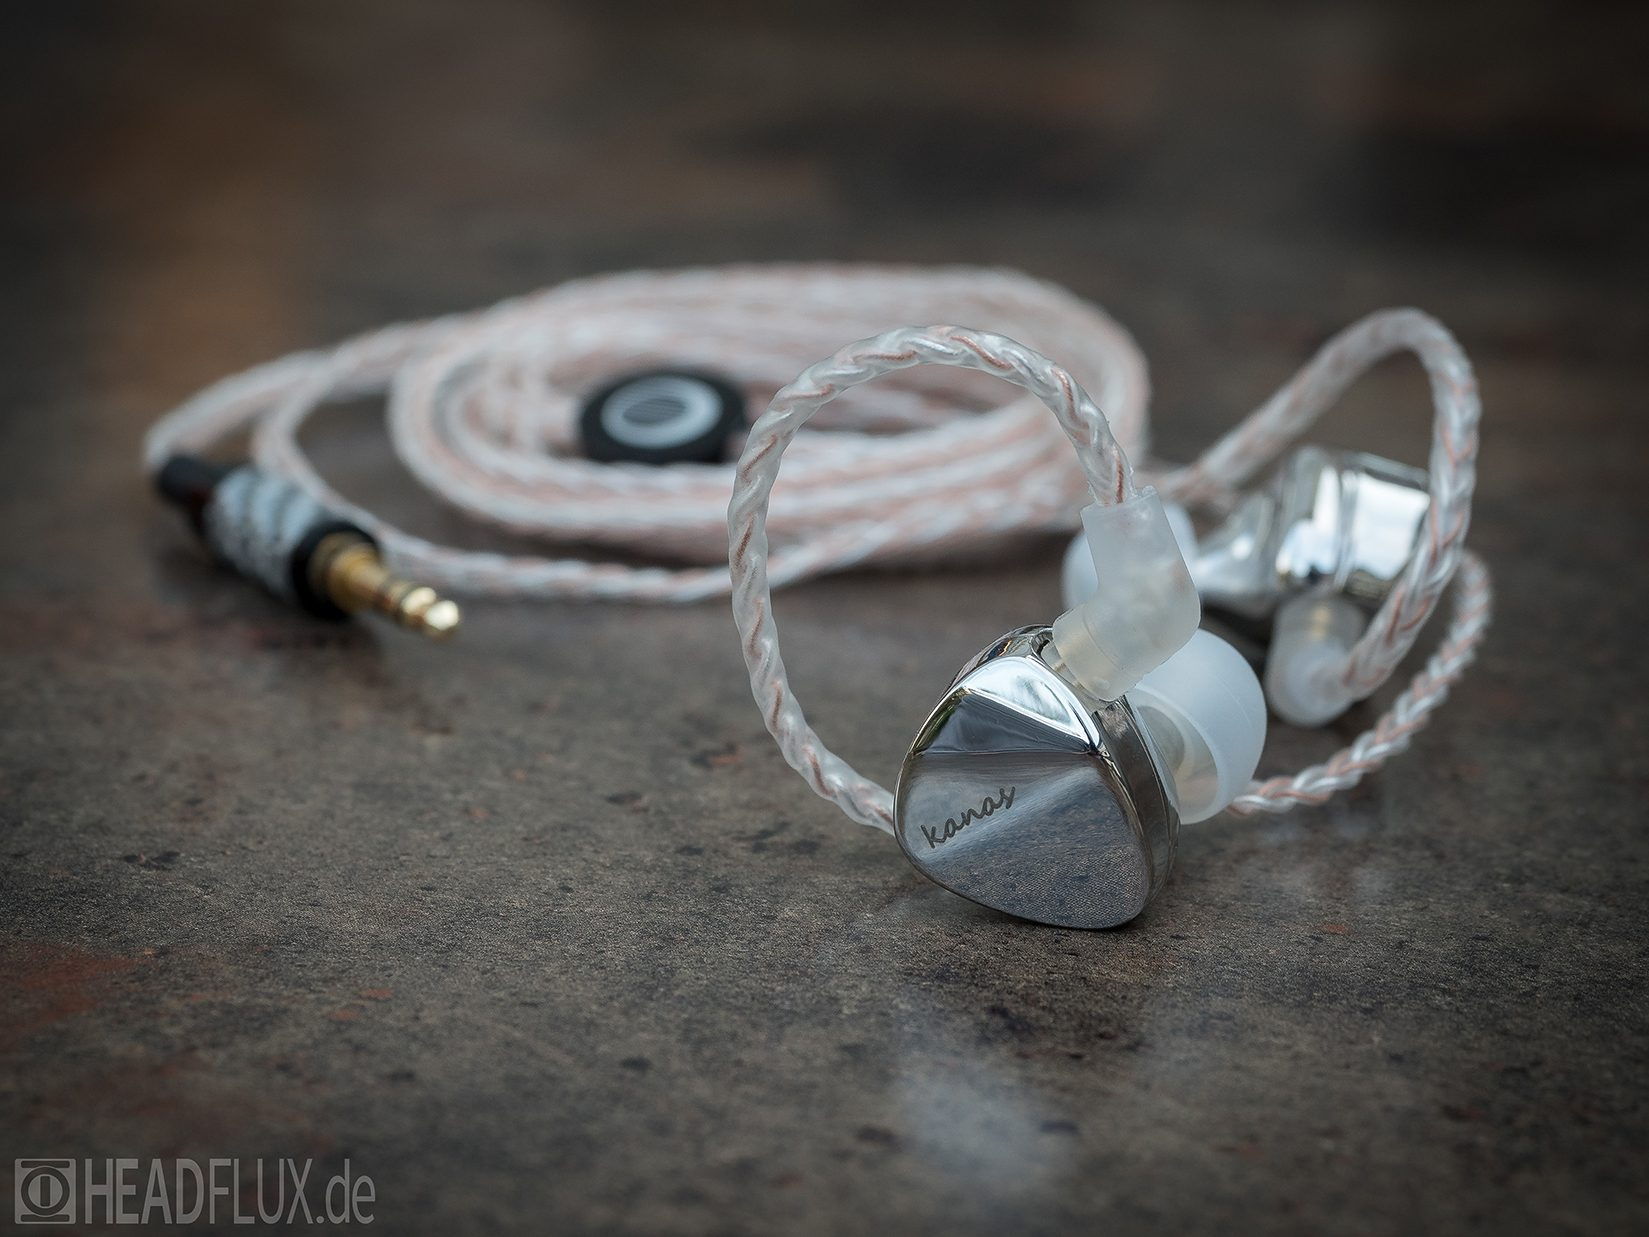 Moondrop Kanas Pro | Headphone Reviews And Discussion - Head